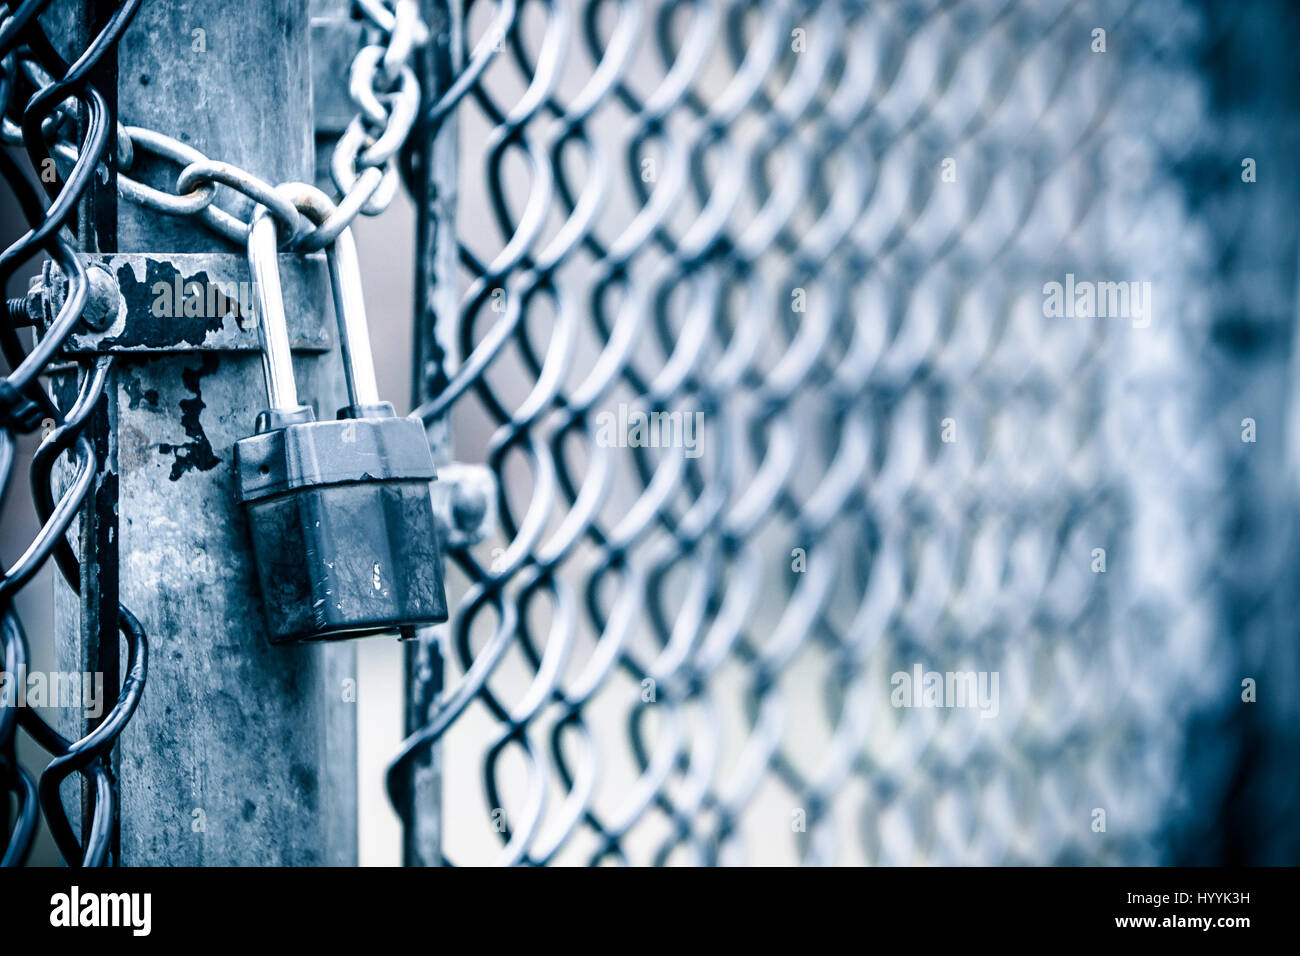 Chicken wire fence gate is locked with a chain and a lock. Toned image. Stock Photo